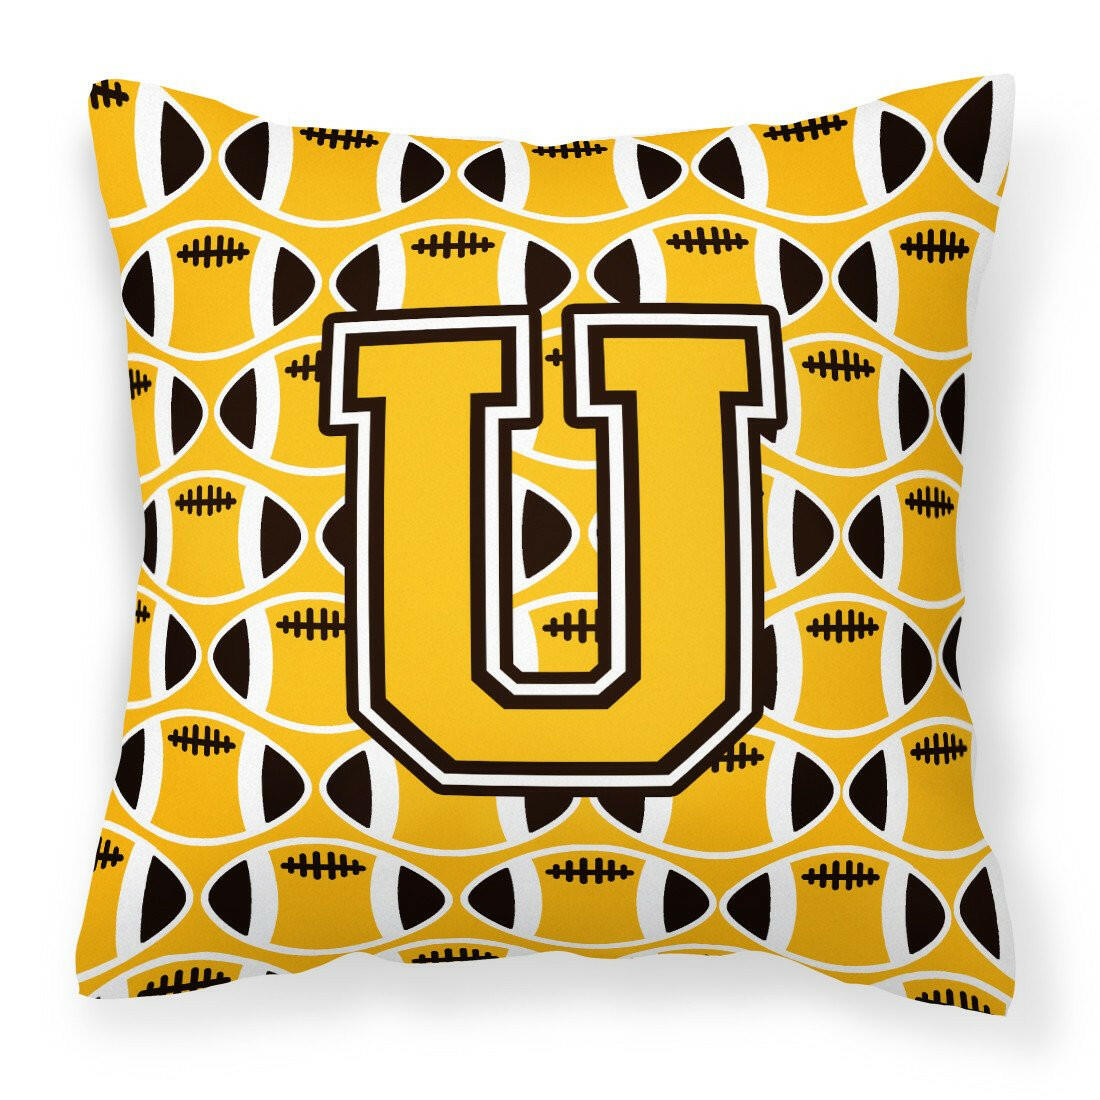 Letter U Football Black, Old Gold and White Fabric Decorative Pillow CJ1080-UPW1414 by Caroline's Treasures